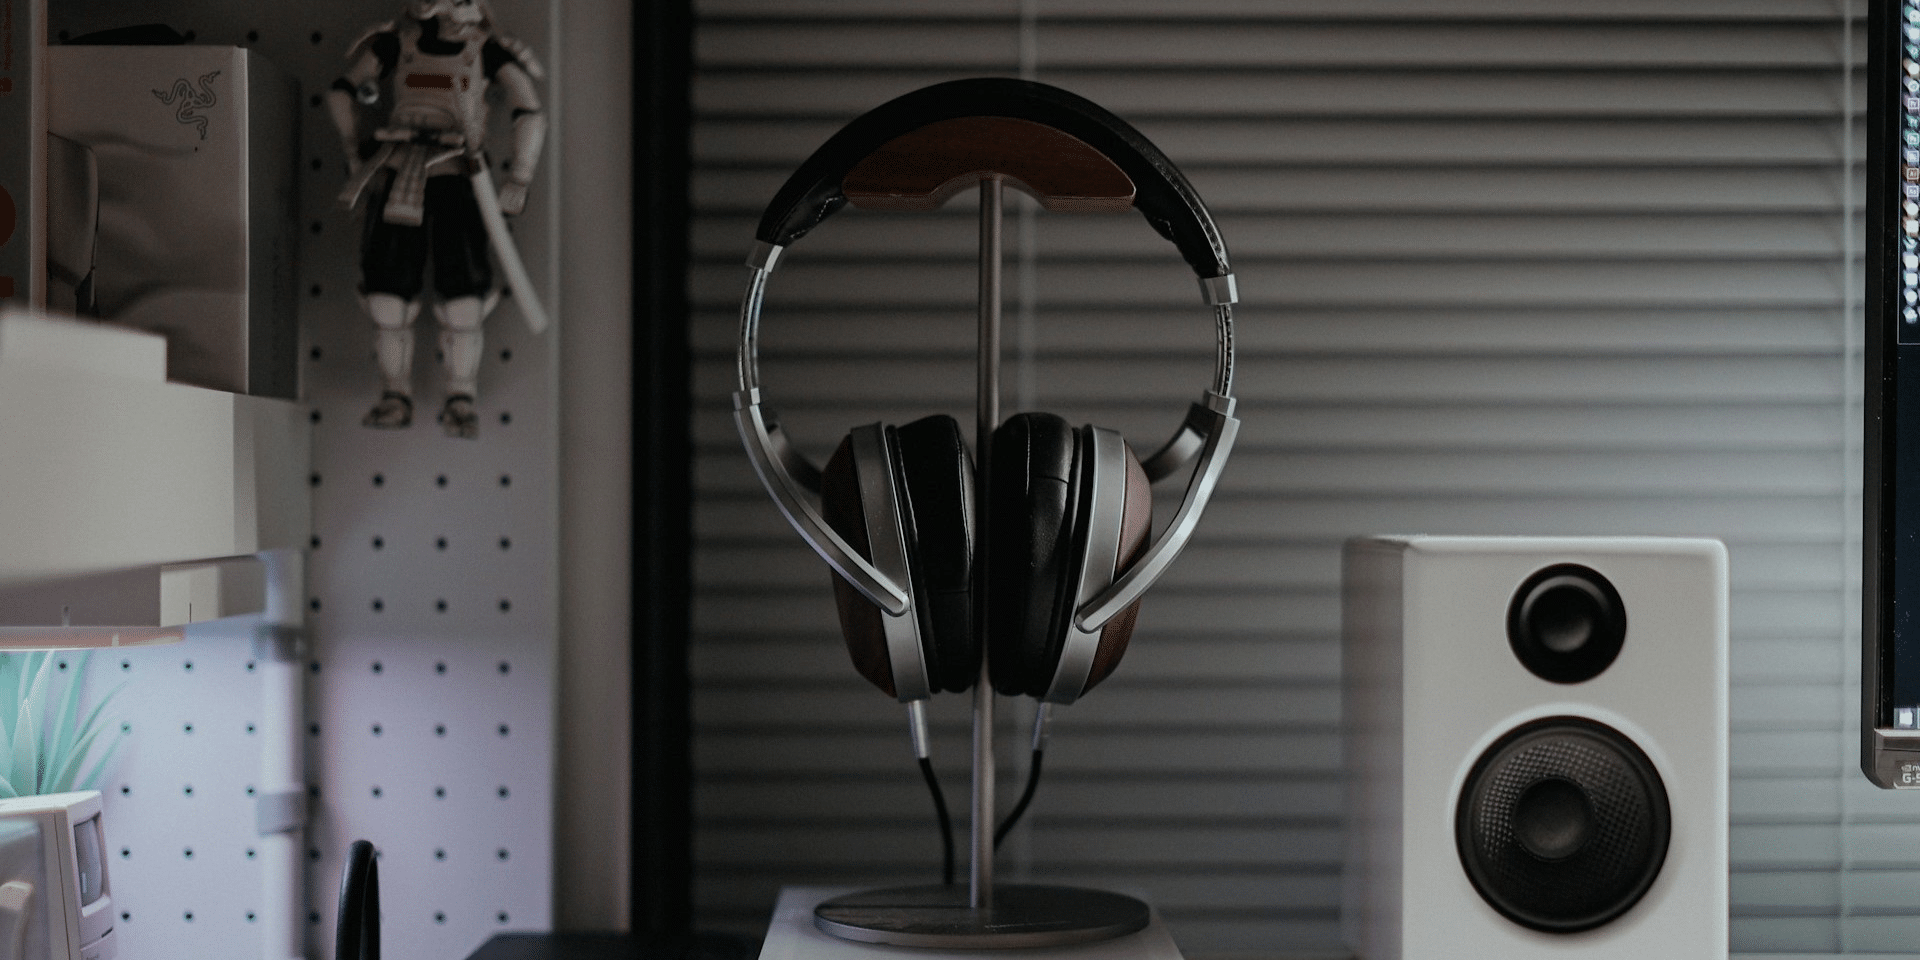 The Return of Wired Headphones: Why Old-School is Making a Comeback